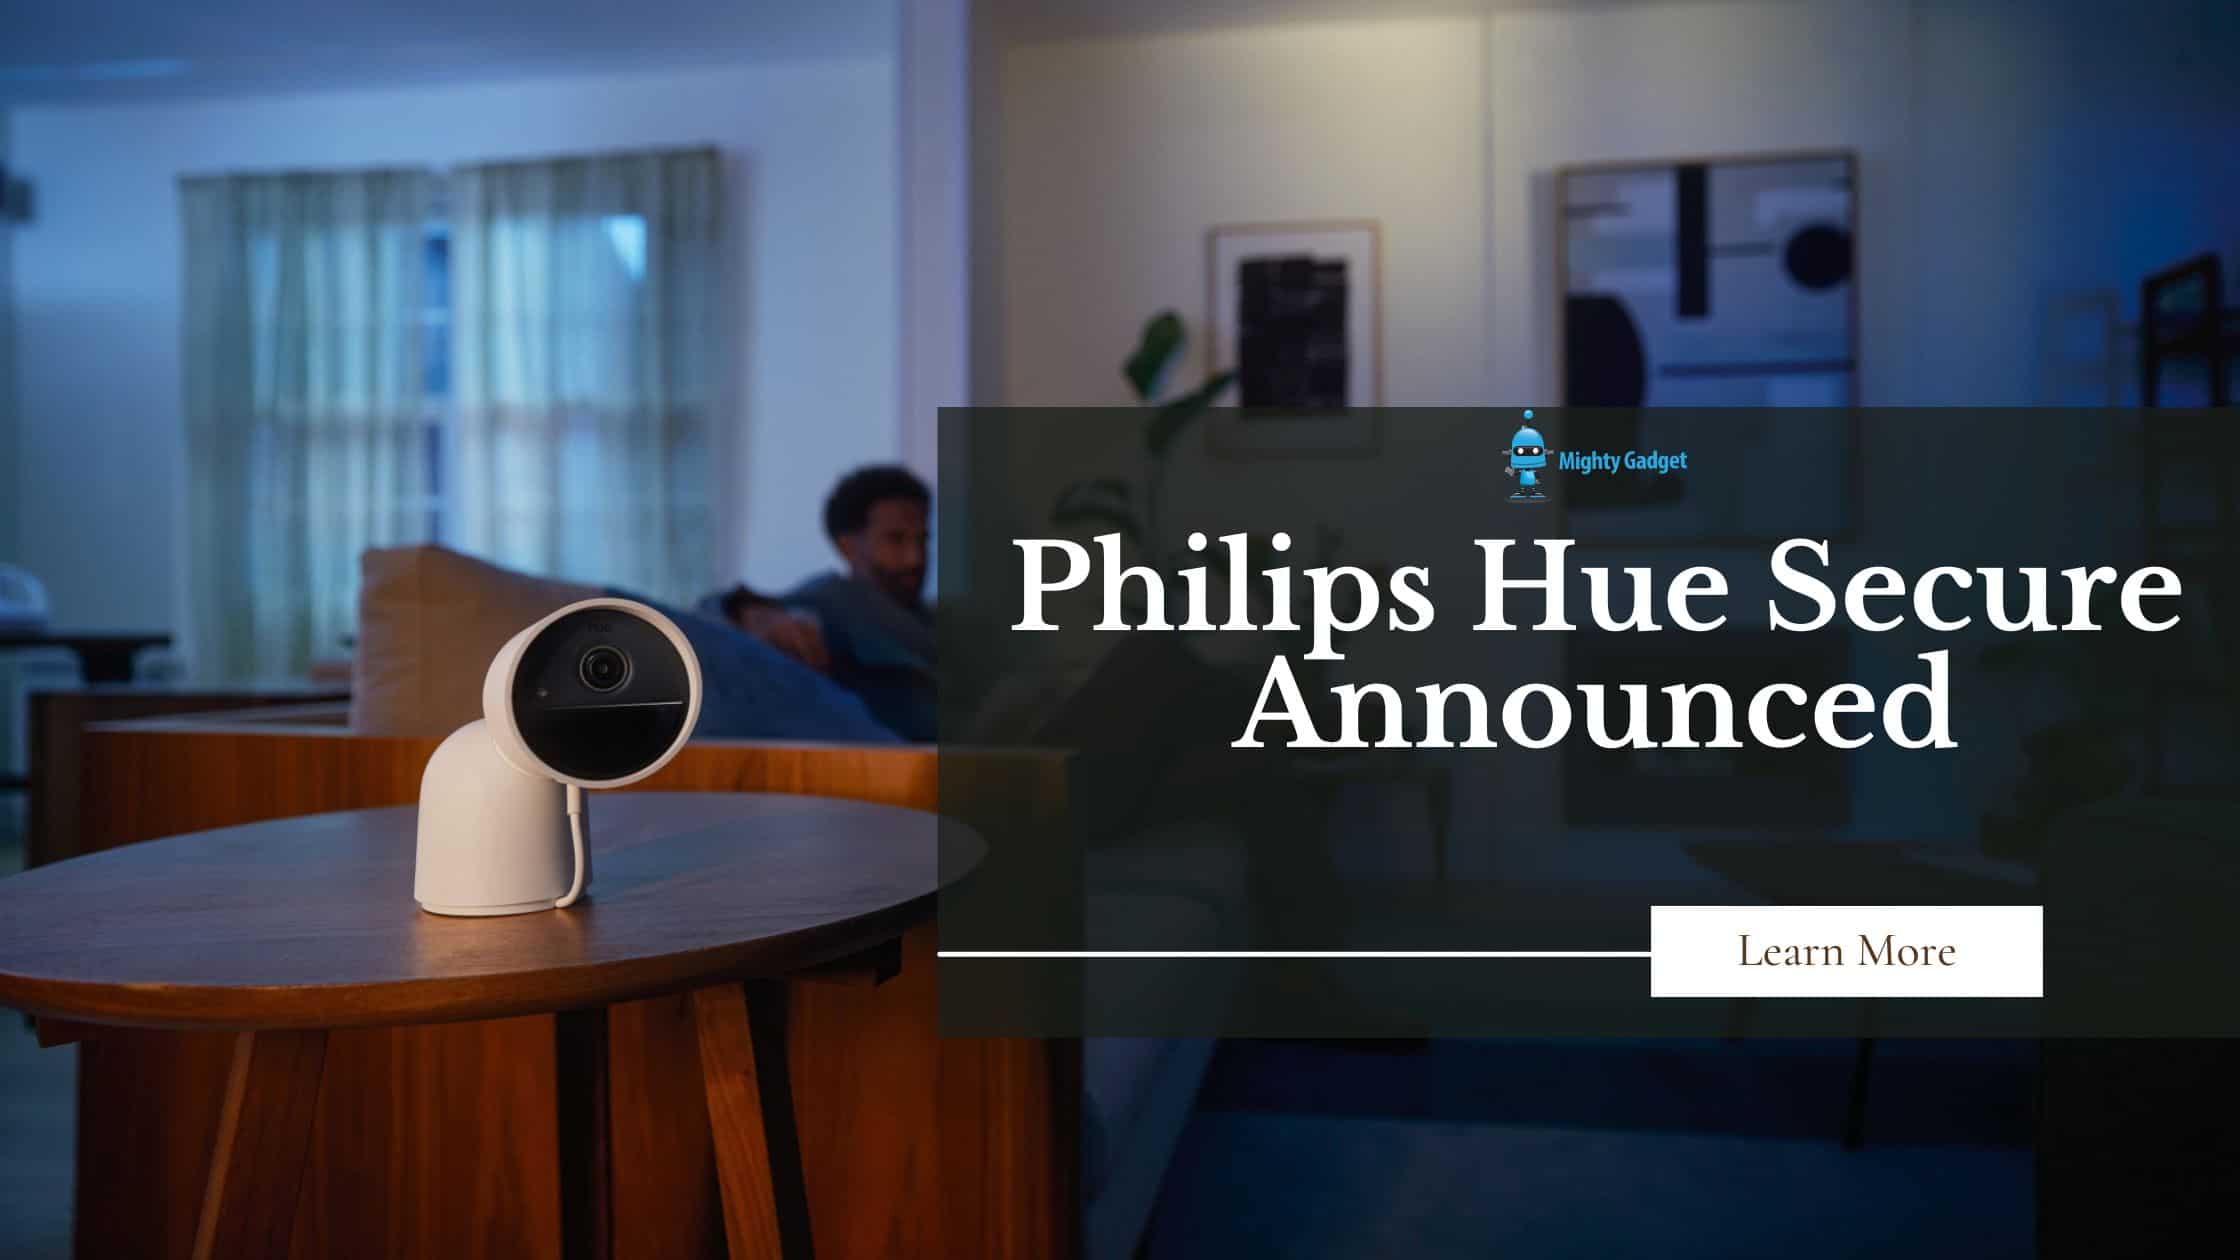 Philips Hue Secure announced including cameras, sensors, and app features to help secure your home